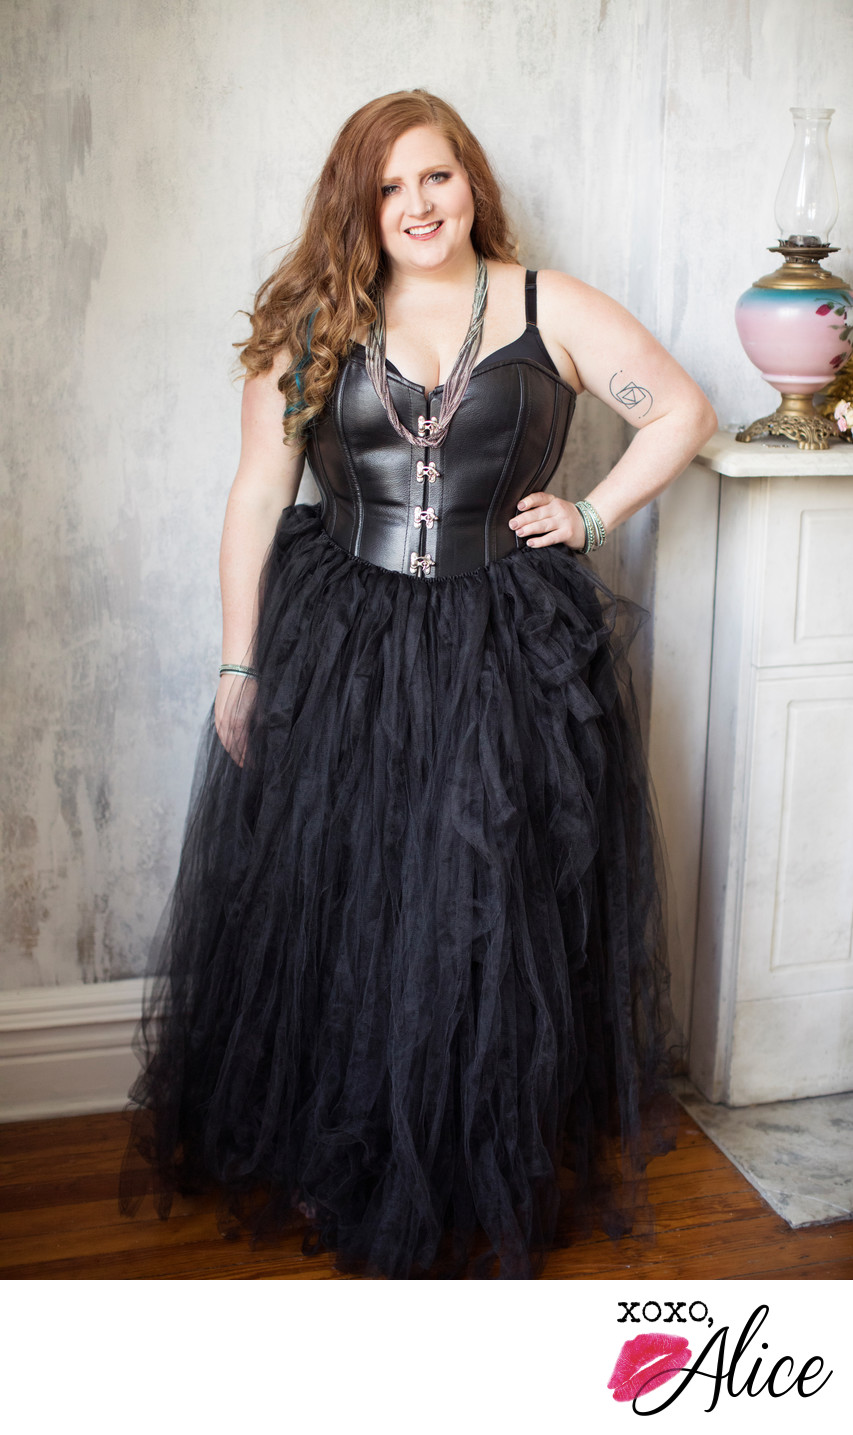 Sexy Black Leather Corset and Tulle Skirt for Dress Up